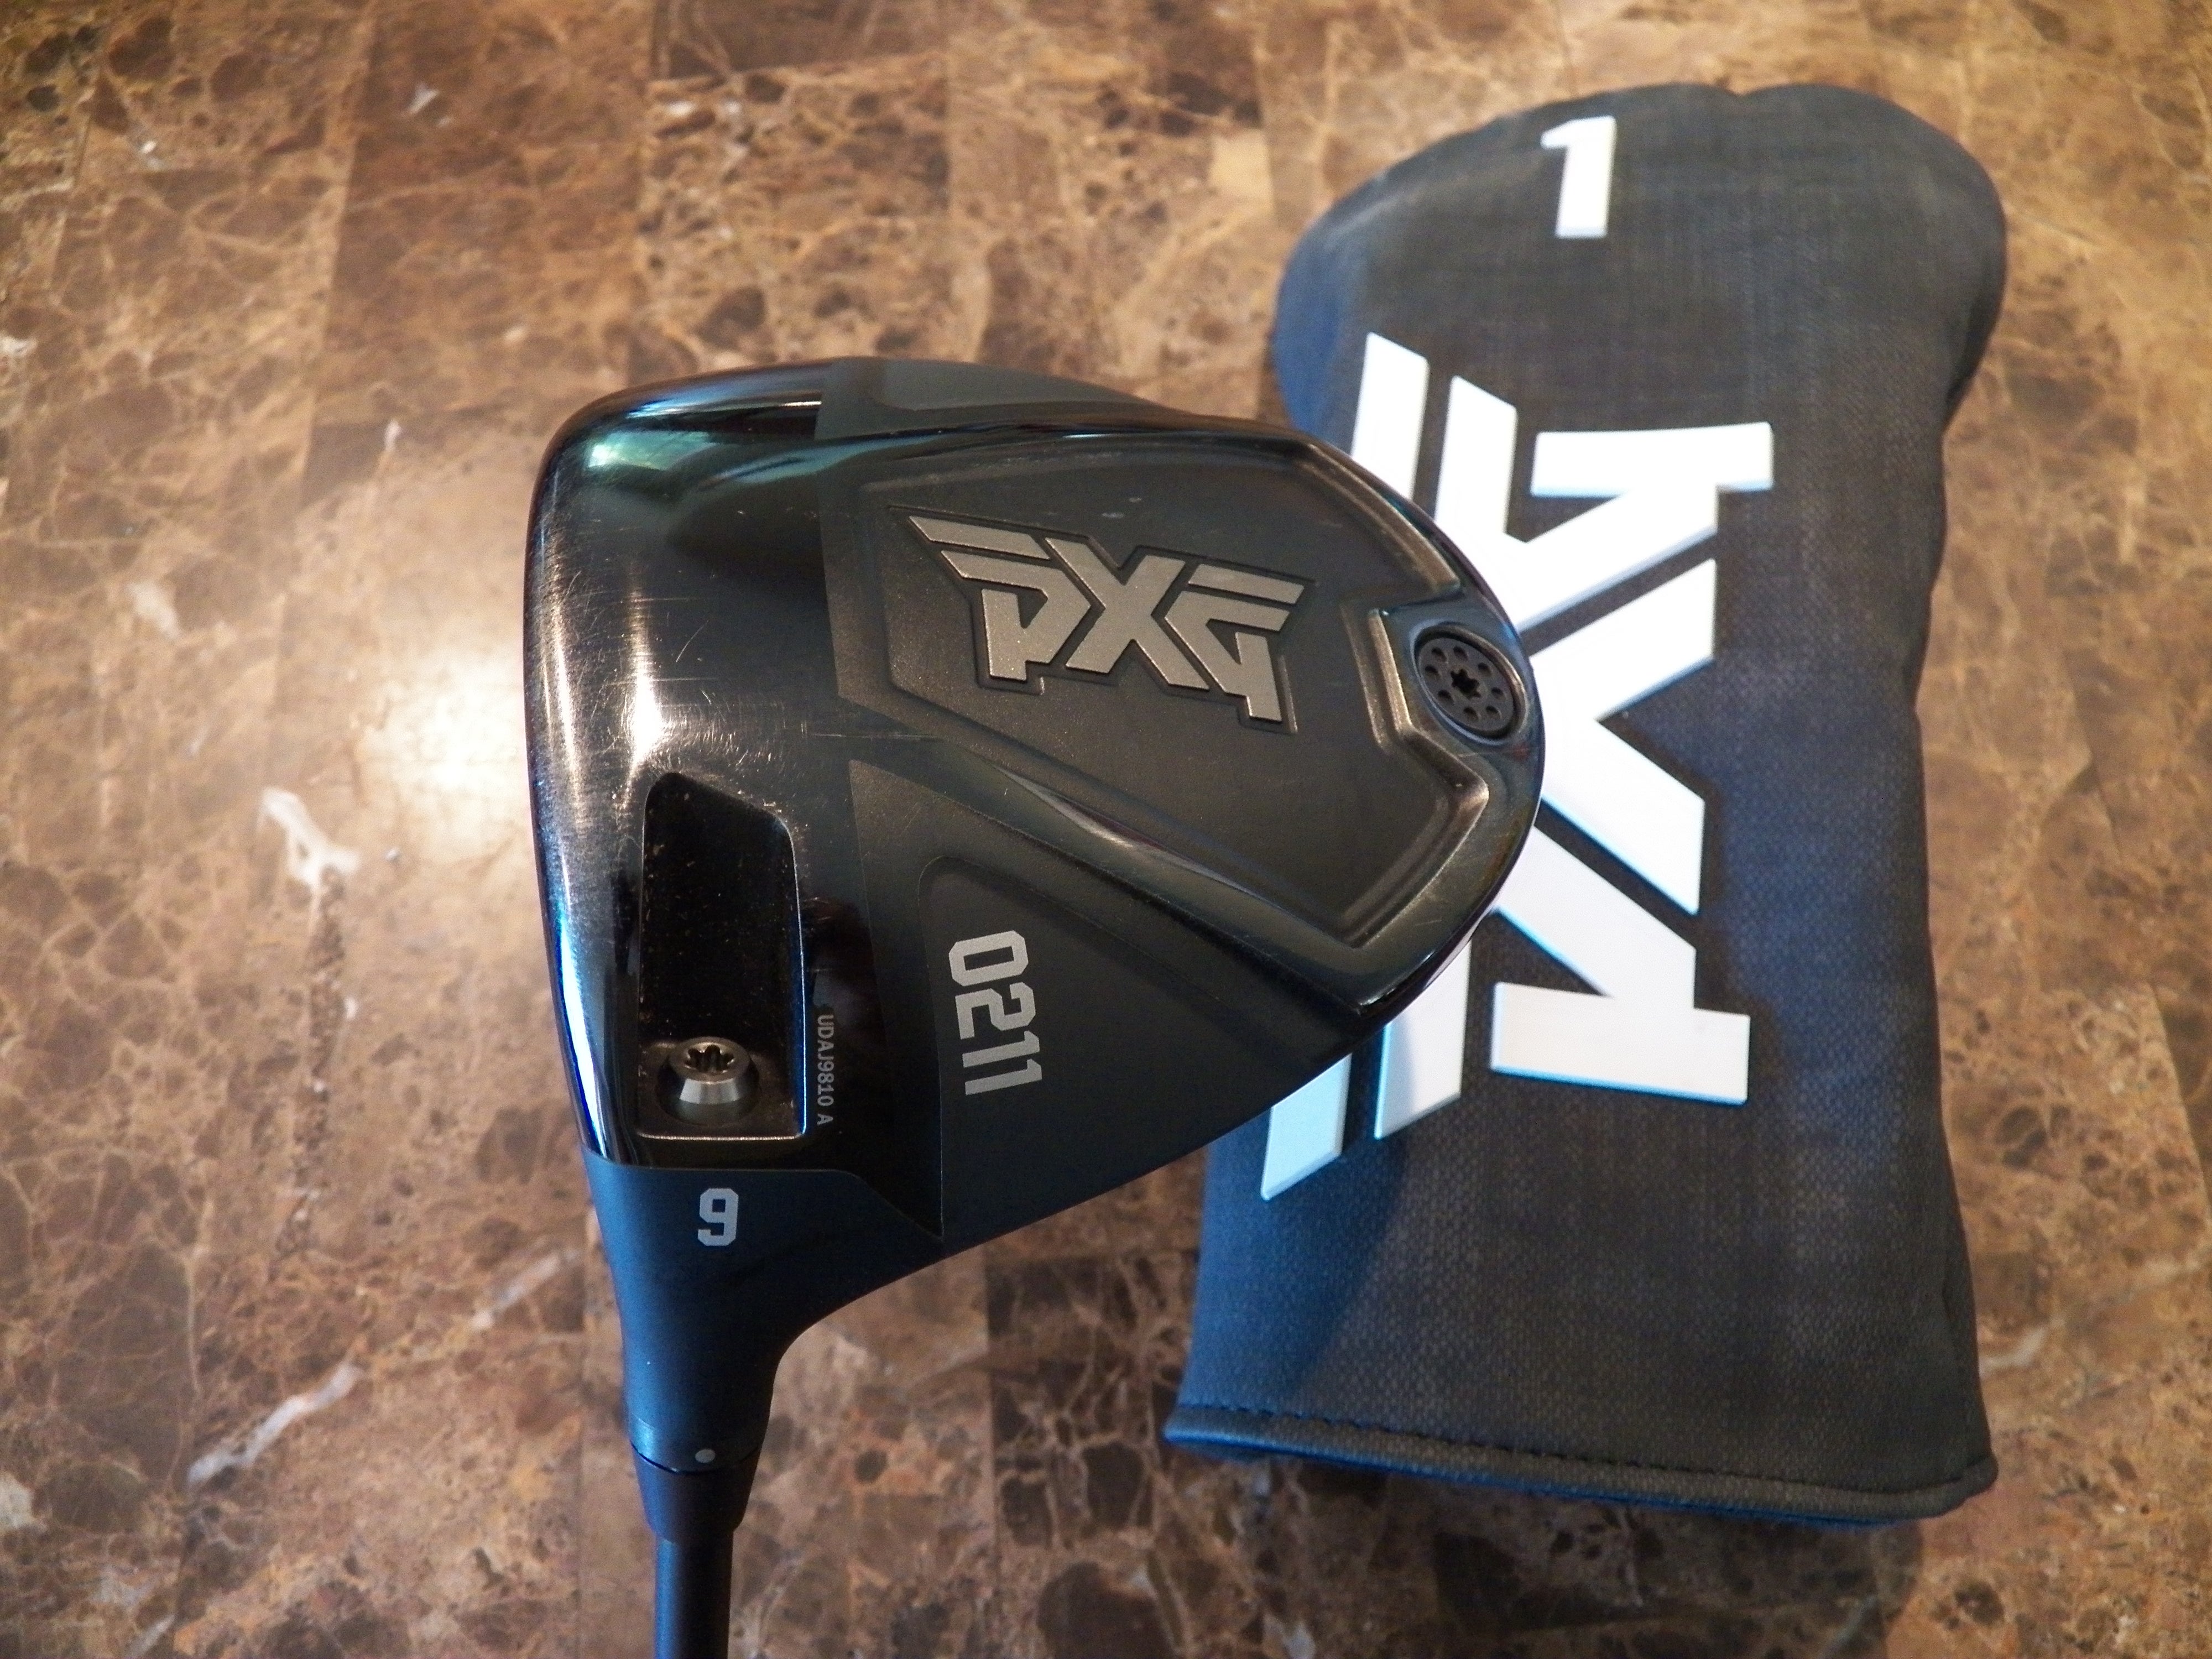 LEFT HAND 2021 PXG 0211 GOLF DRIVER 9* HZRDUS BLACK 5.5 FIRM WITH